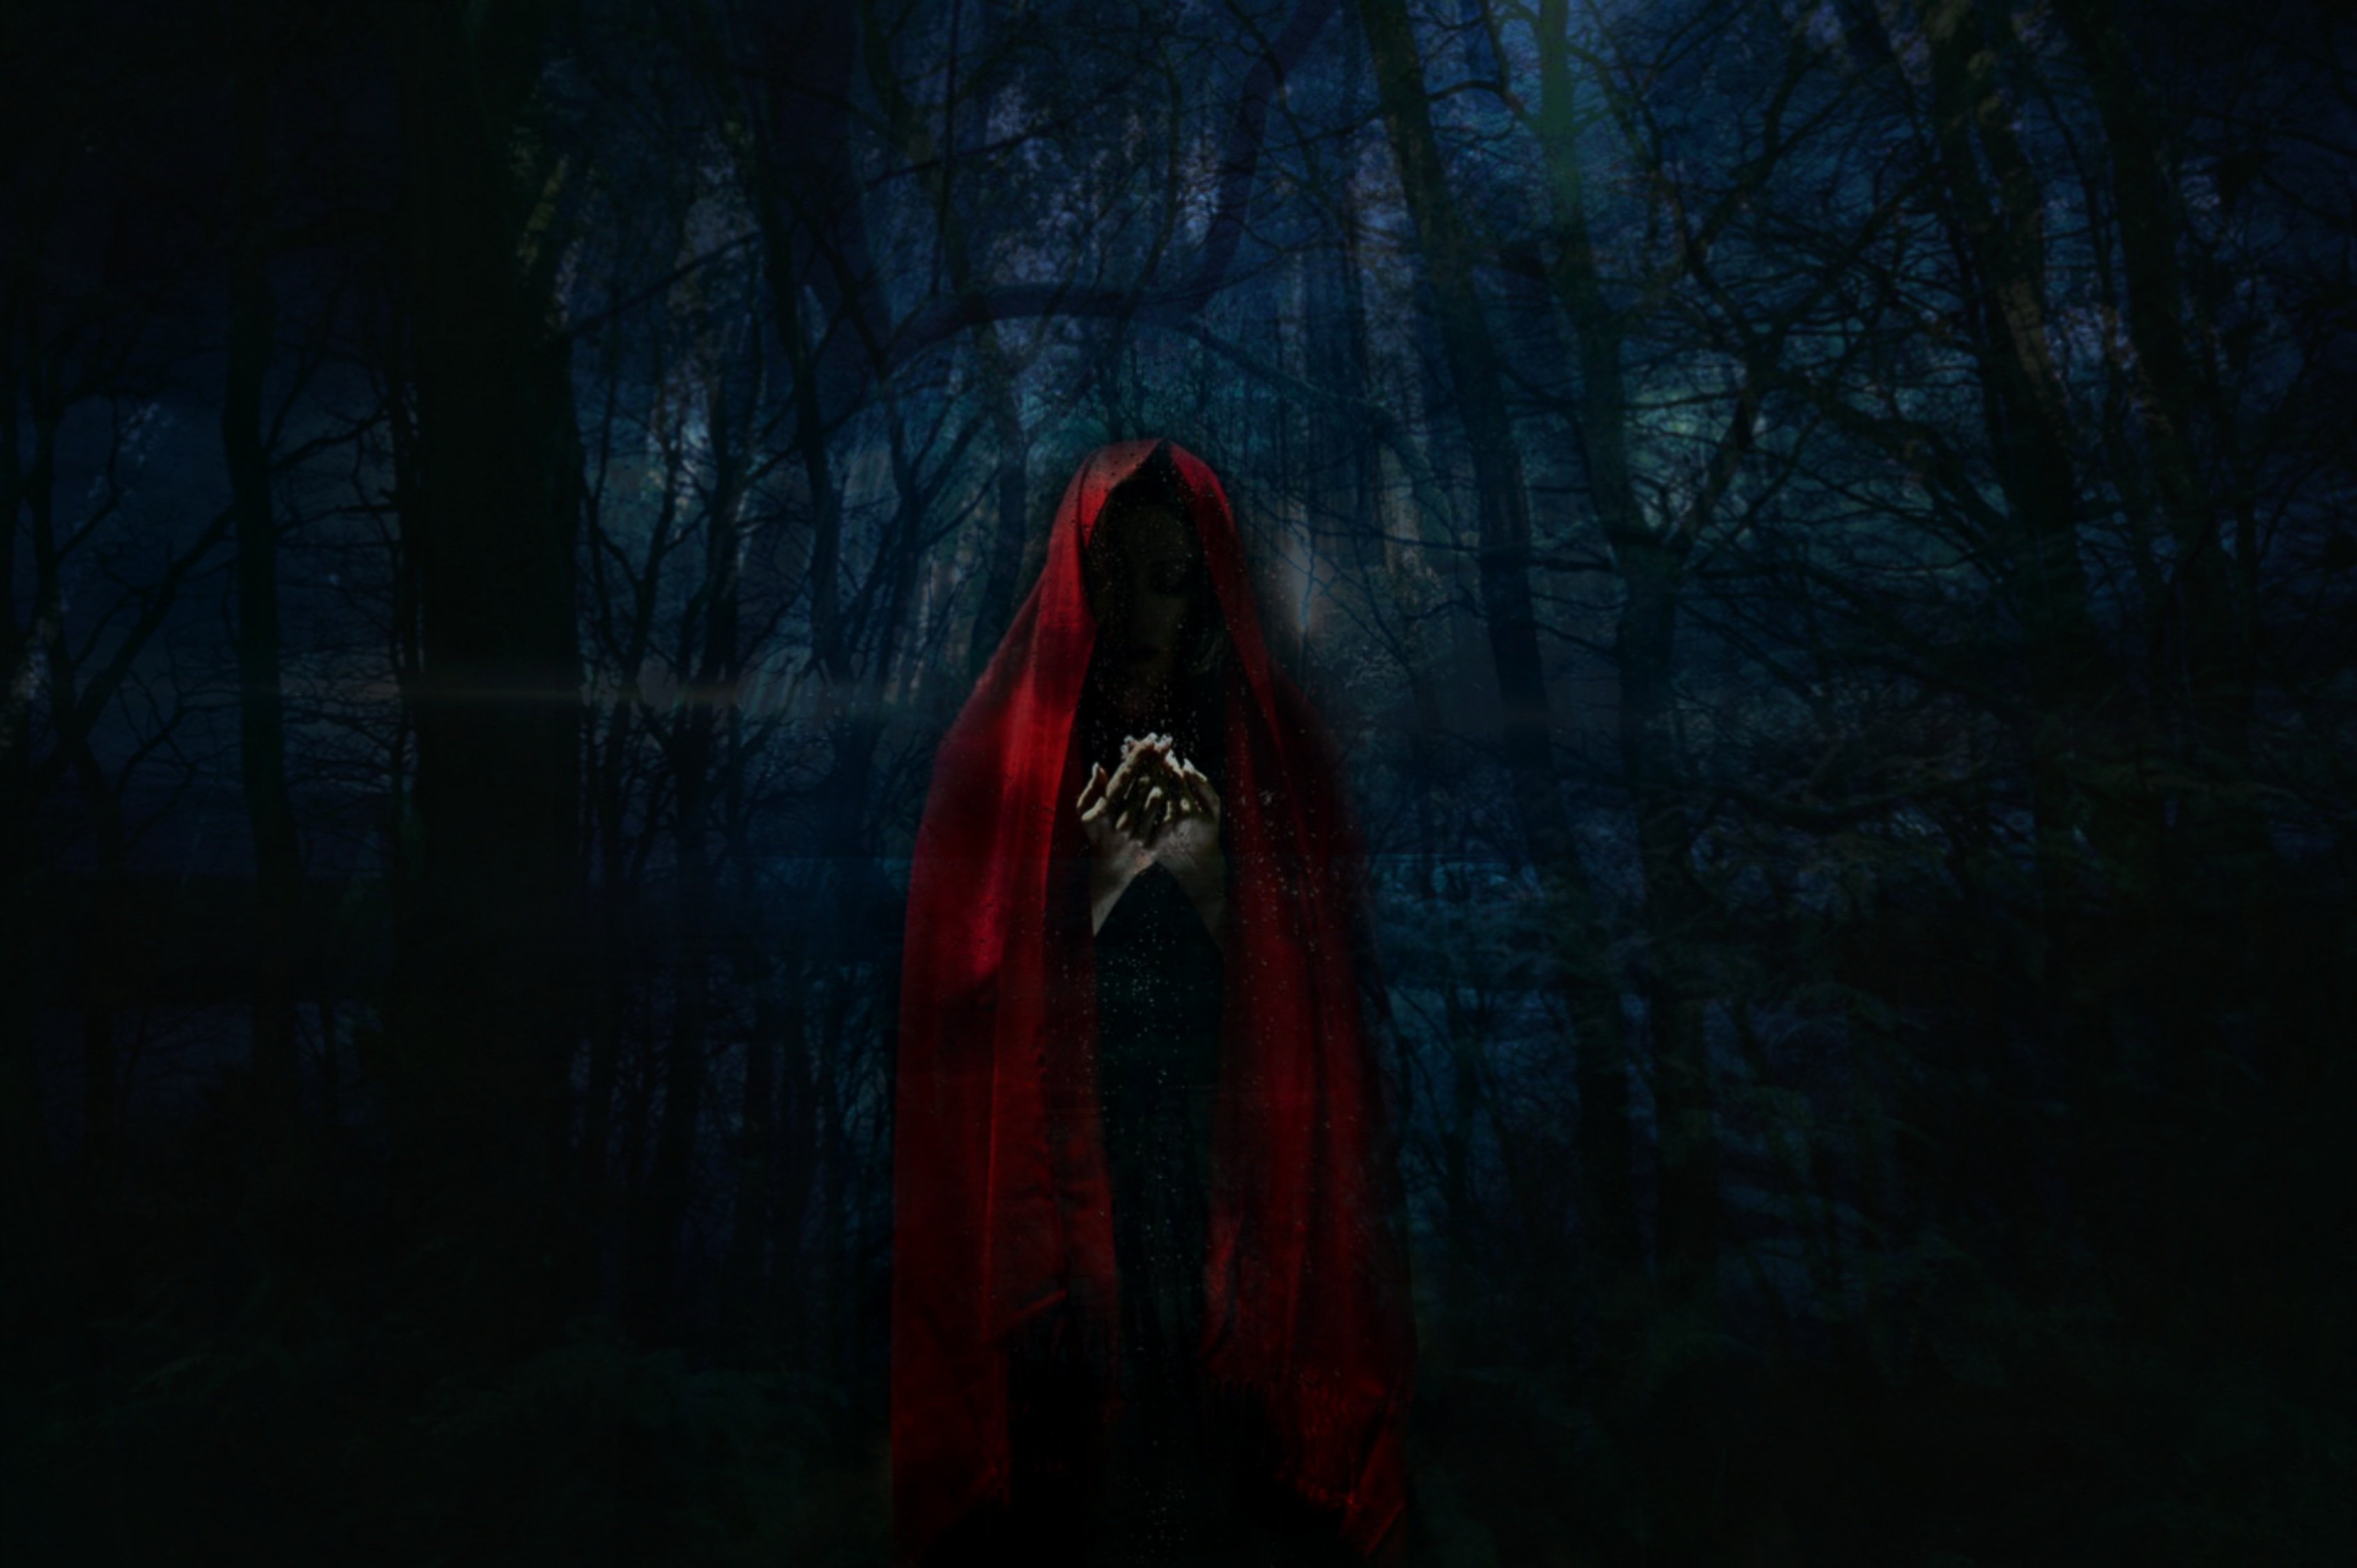 art, gloomy, female, woman, forest, spooky, eerie, mantle High Definition image